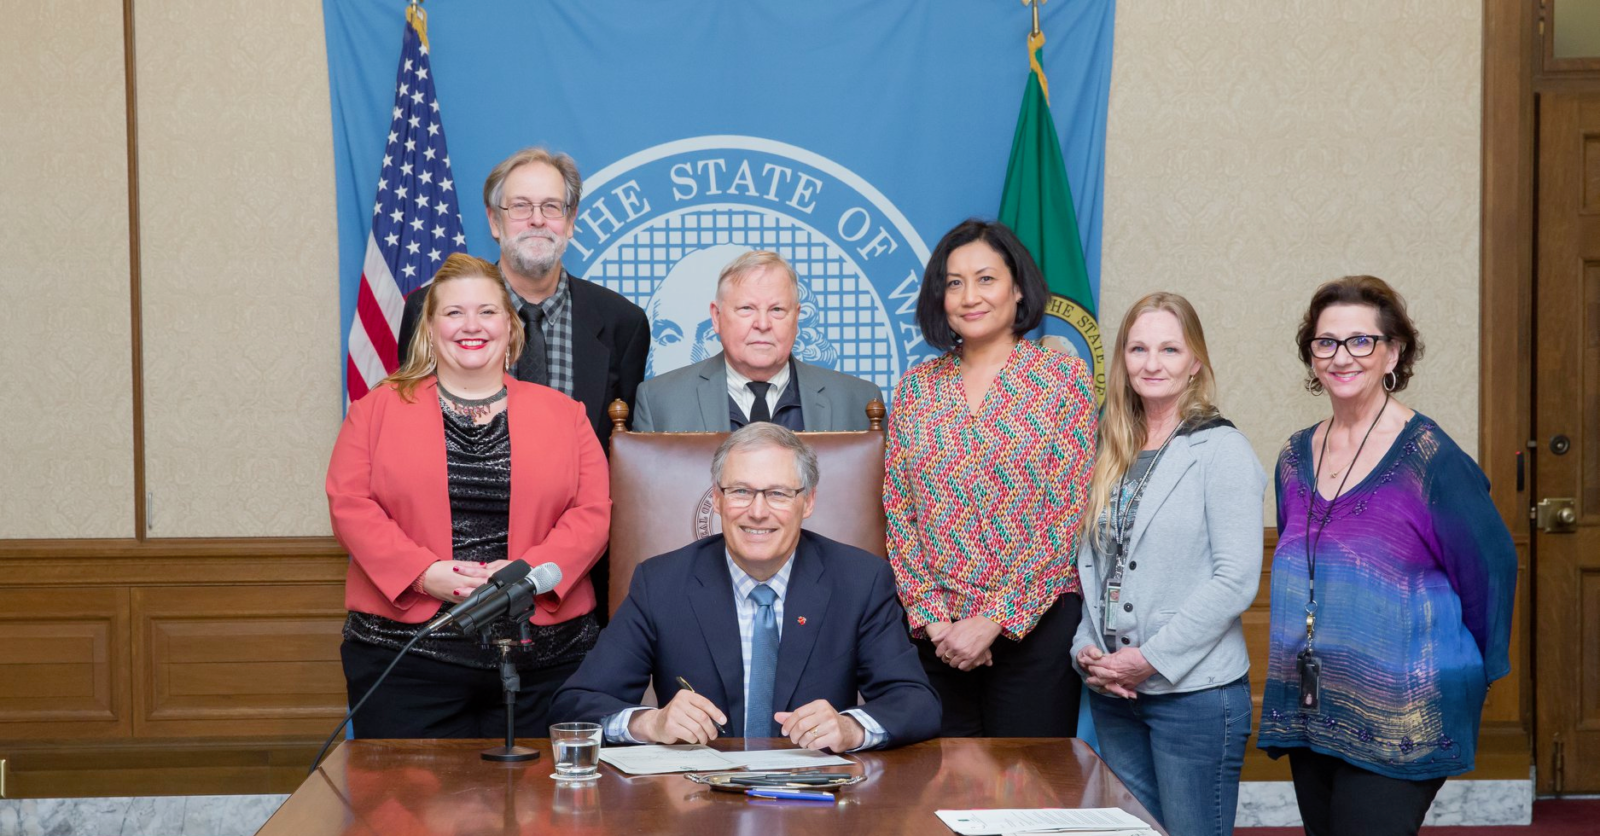 A group of people standing in a half semi-circle around the governor's desk. Behind the group is the blue State of Washington seal, a USA flag, and the Washington State flag. Governor Inslee is smiling at the camera and has a half-poised pen above a piece of legislation. The group is dressed semi-professionally. The group features Patricia Hunter the Washington State Long-Term Care Ombuds.